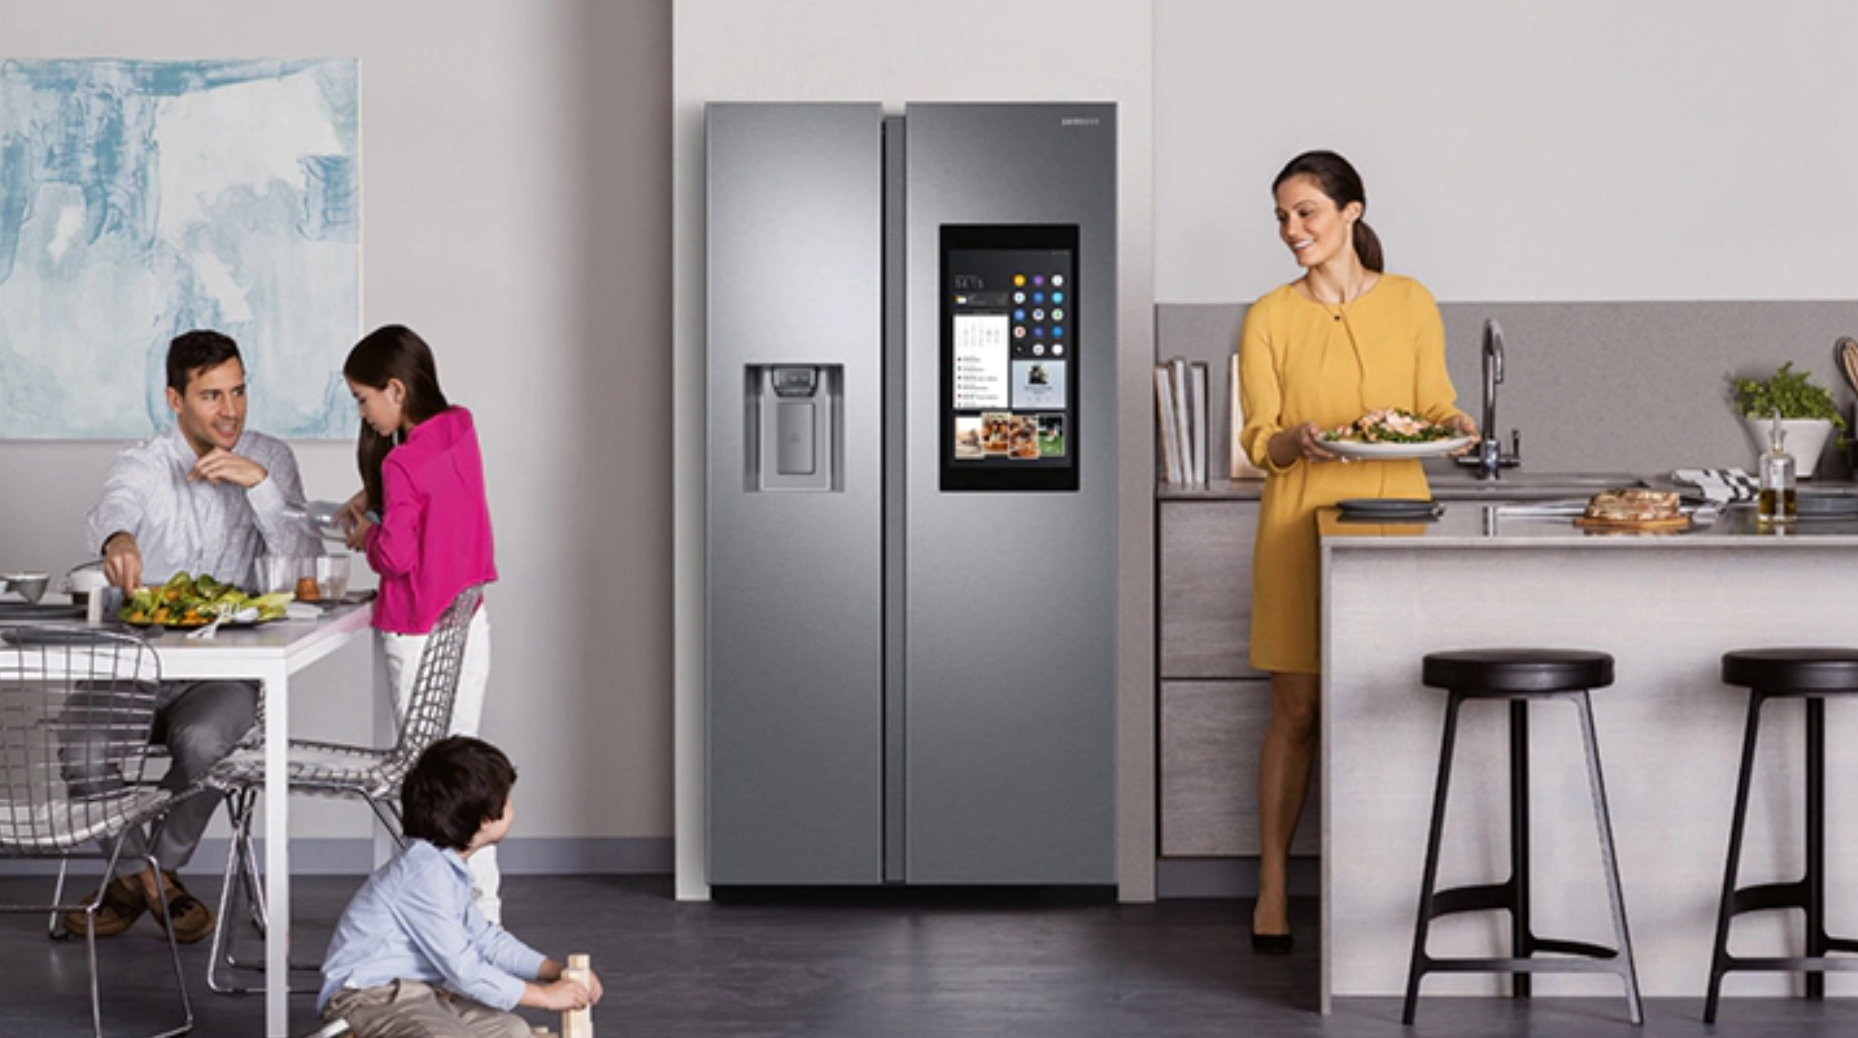 https://www.gearbrain.com/media-library/less-than-p-greater-than-smart-appliances-like-connected-fridges-cost-considerably-more-money-less-than-p-greater-than.png?id=23380603